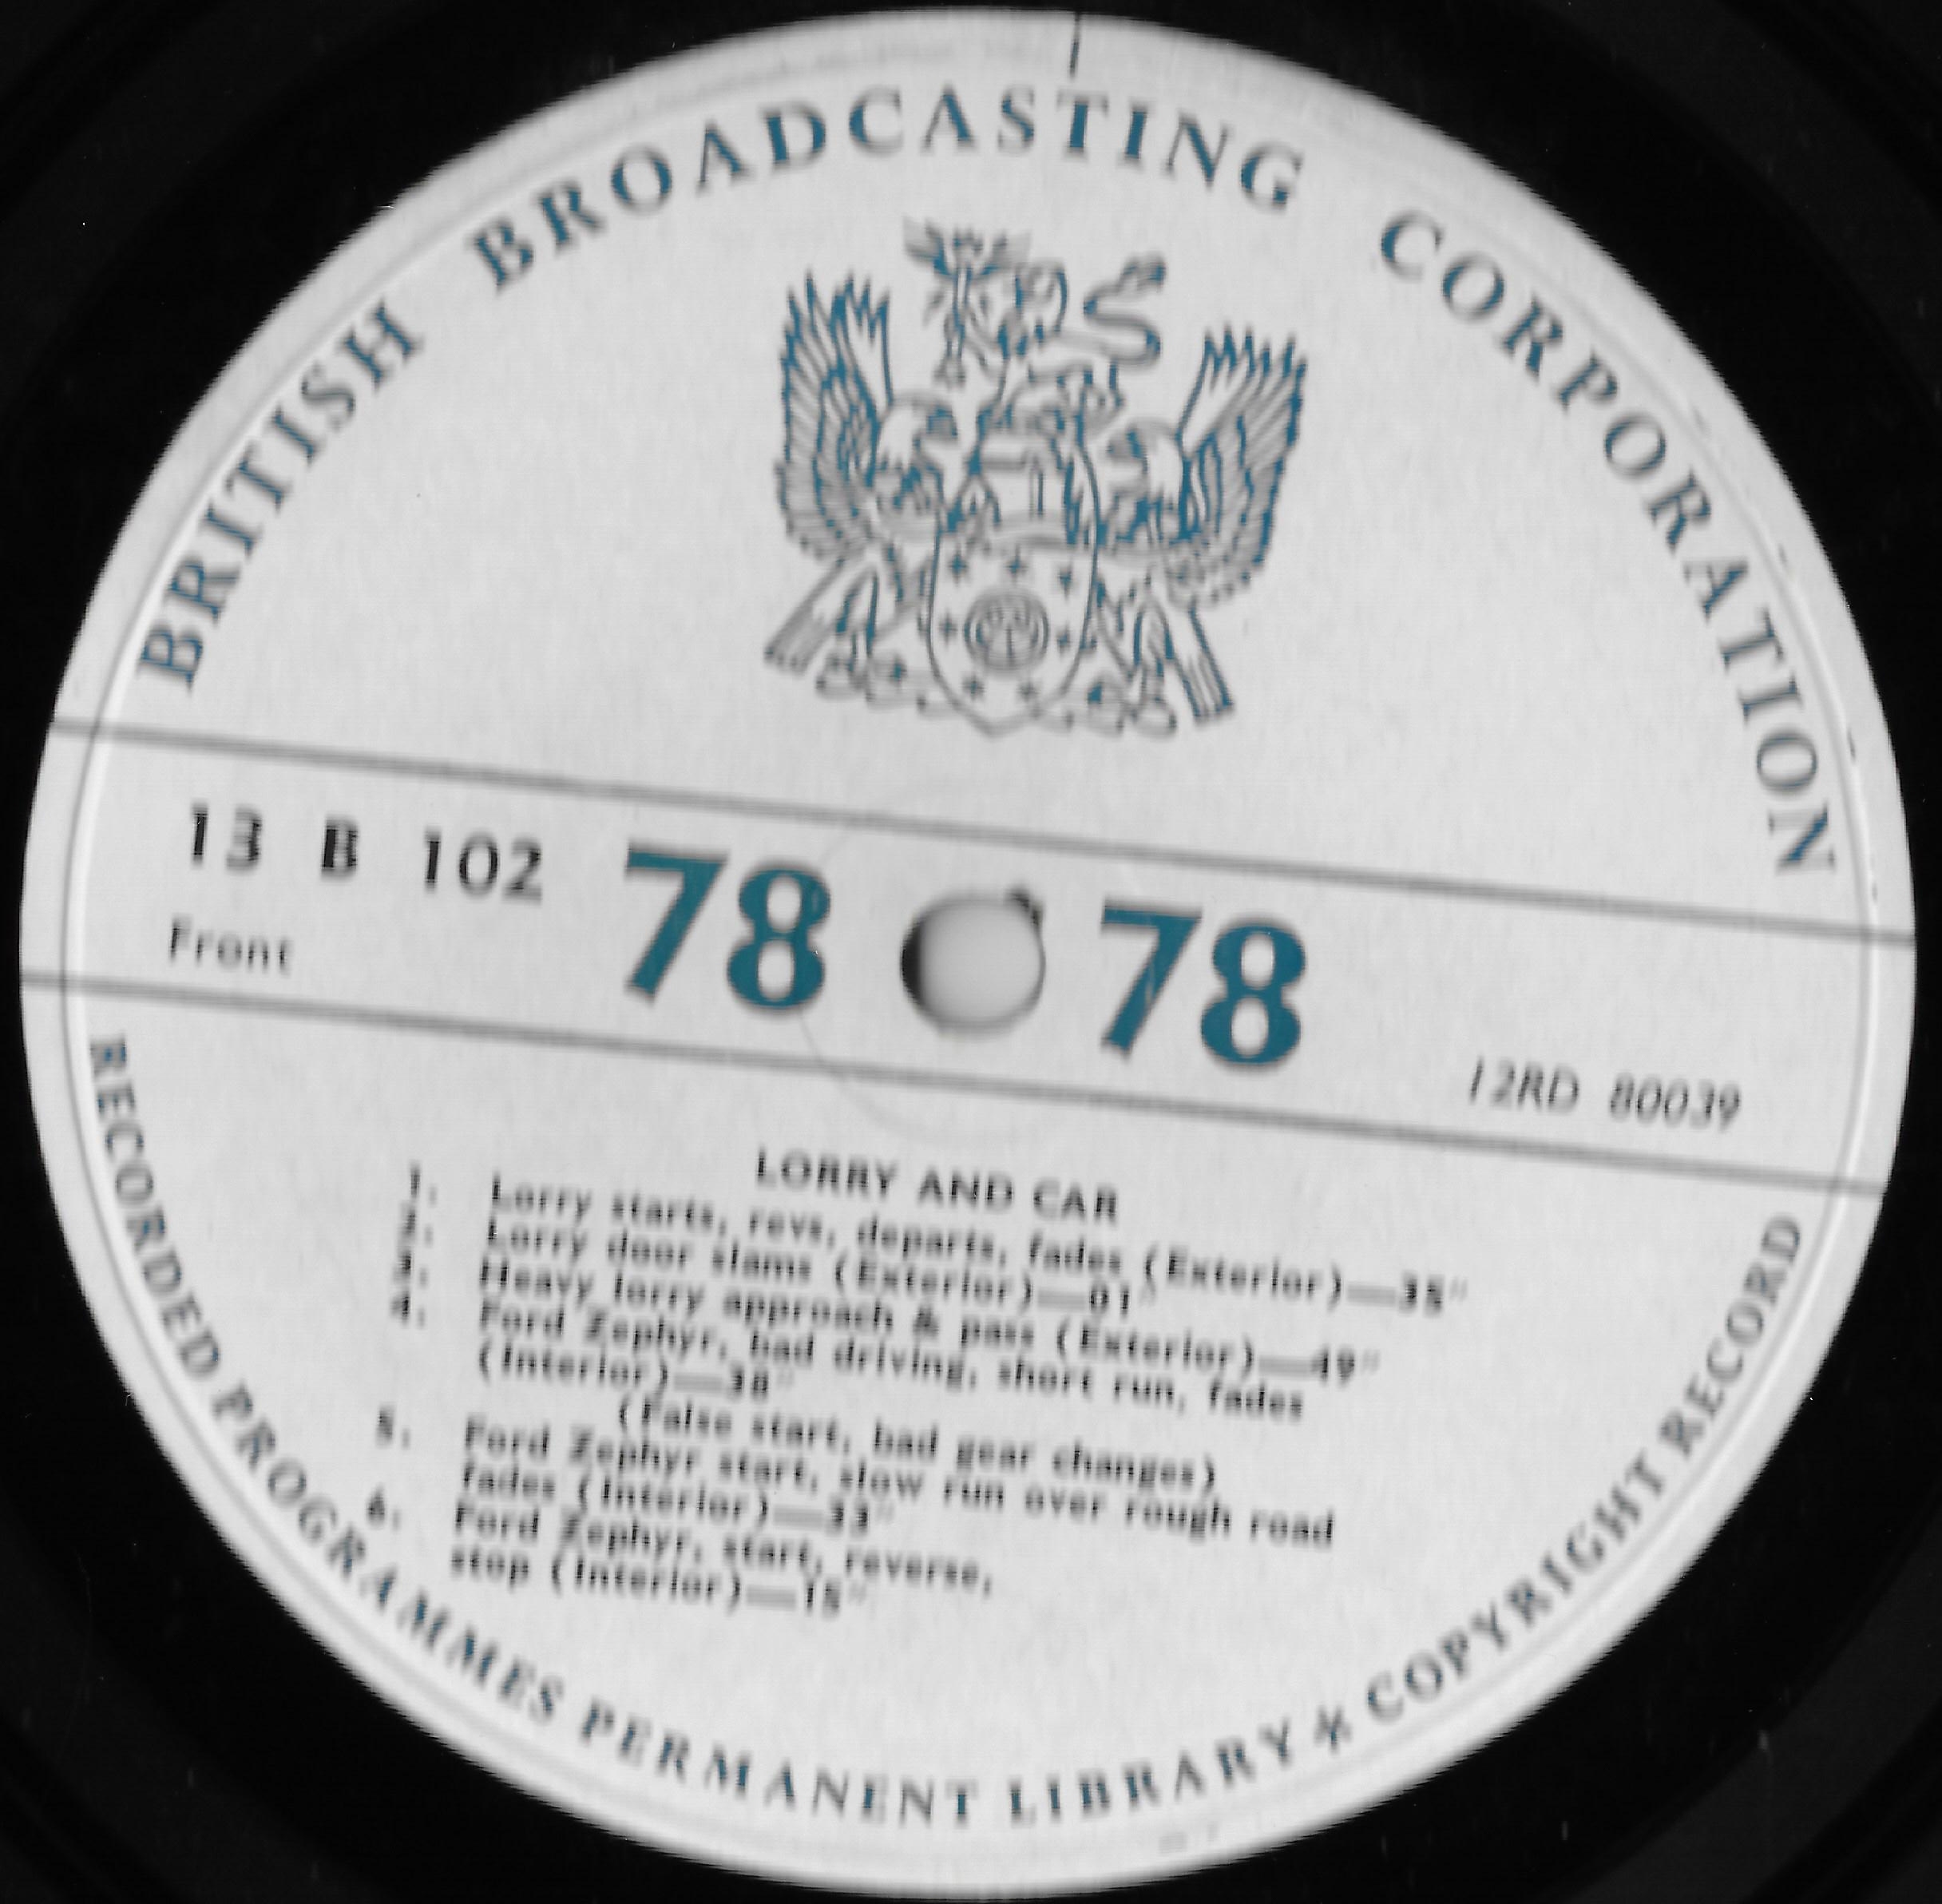 View 78's label picture ^.